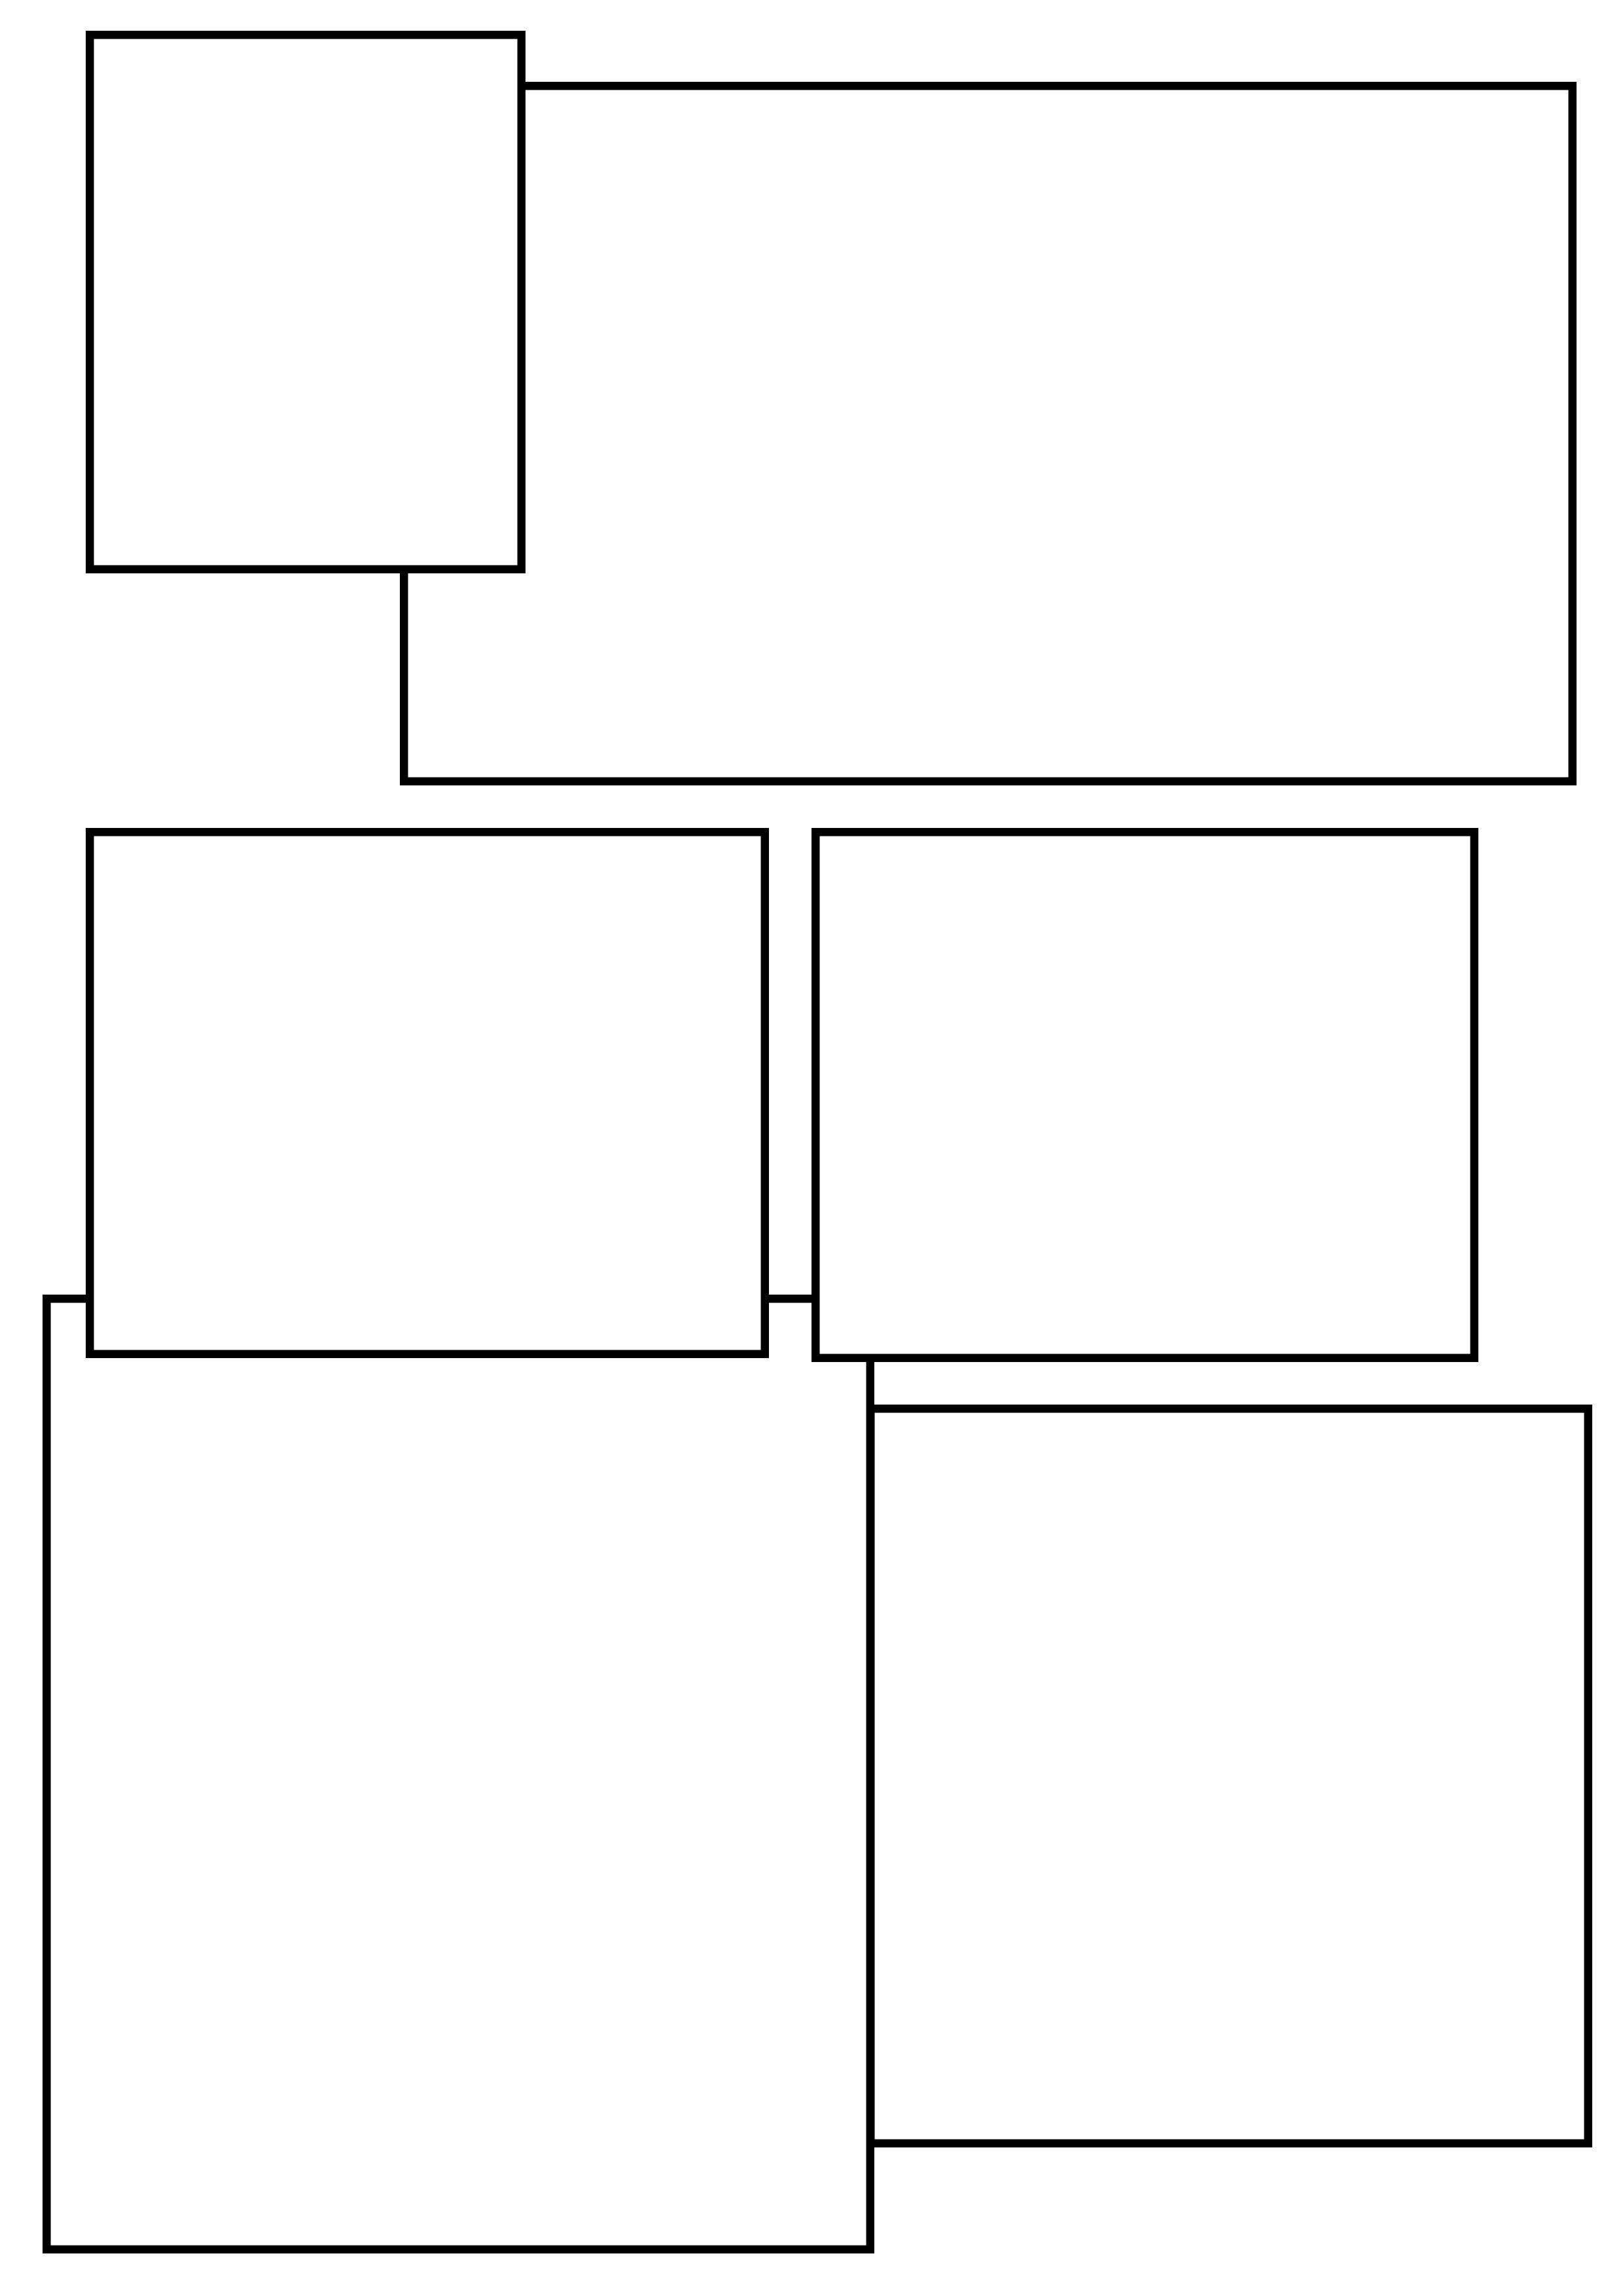 Comic Strip Template Word Setting Out Layouts for the Ic Strip